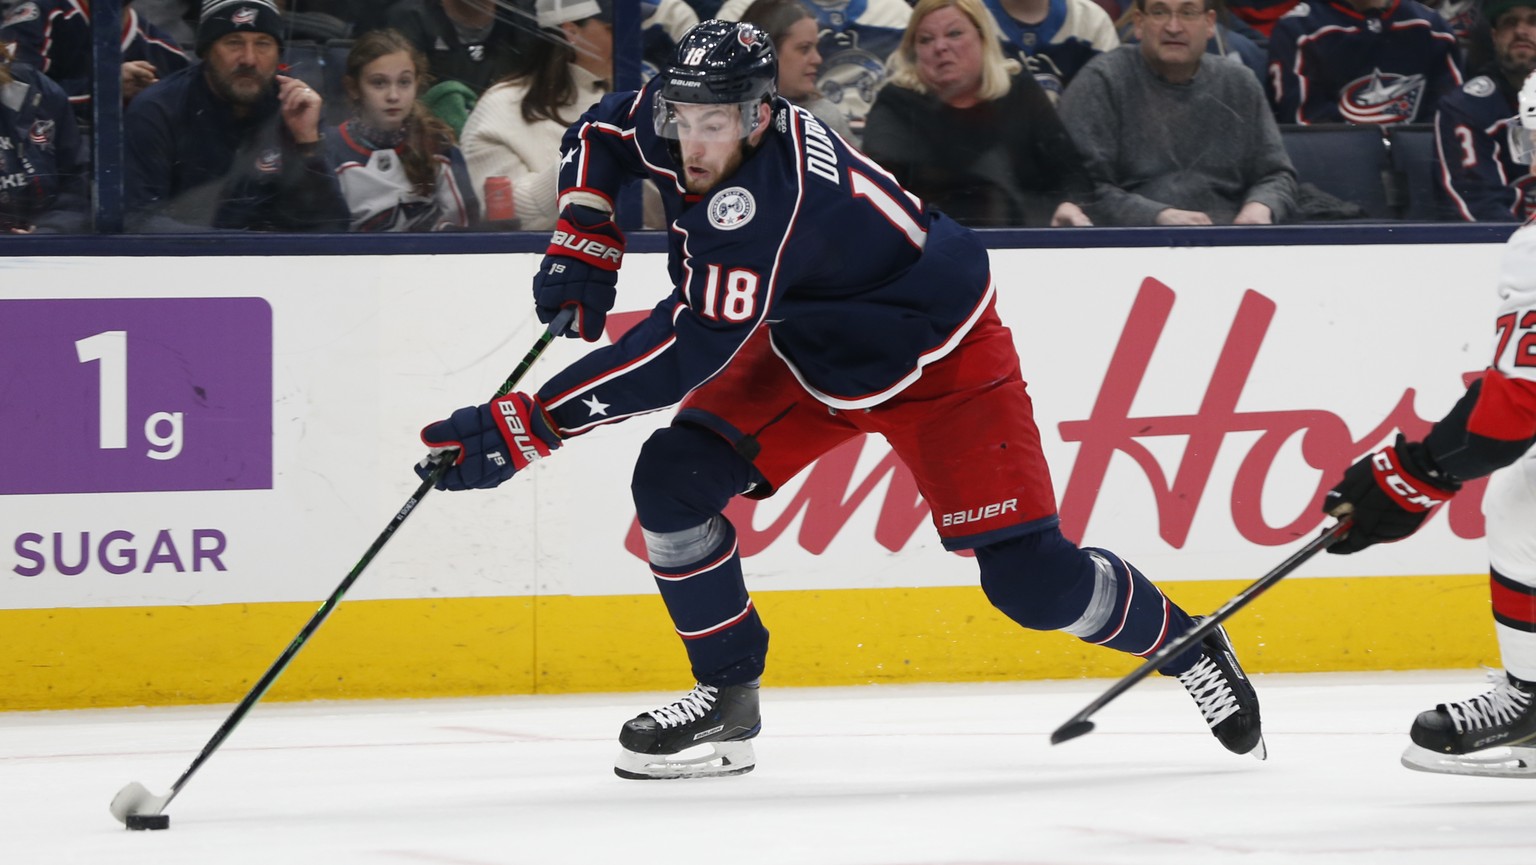 FILE - In this Feb. 24, 2020, file photo, Columbus Blue Jackets&#039; Pierre-Luc Dubois plays against the Ottawa Senators during an NHL hockey game in Columbus, Ohio. With top-line center Pierre-Luc D ...